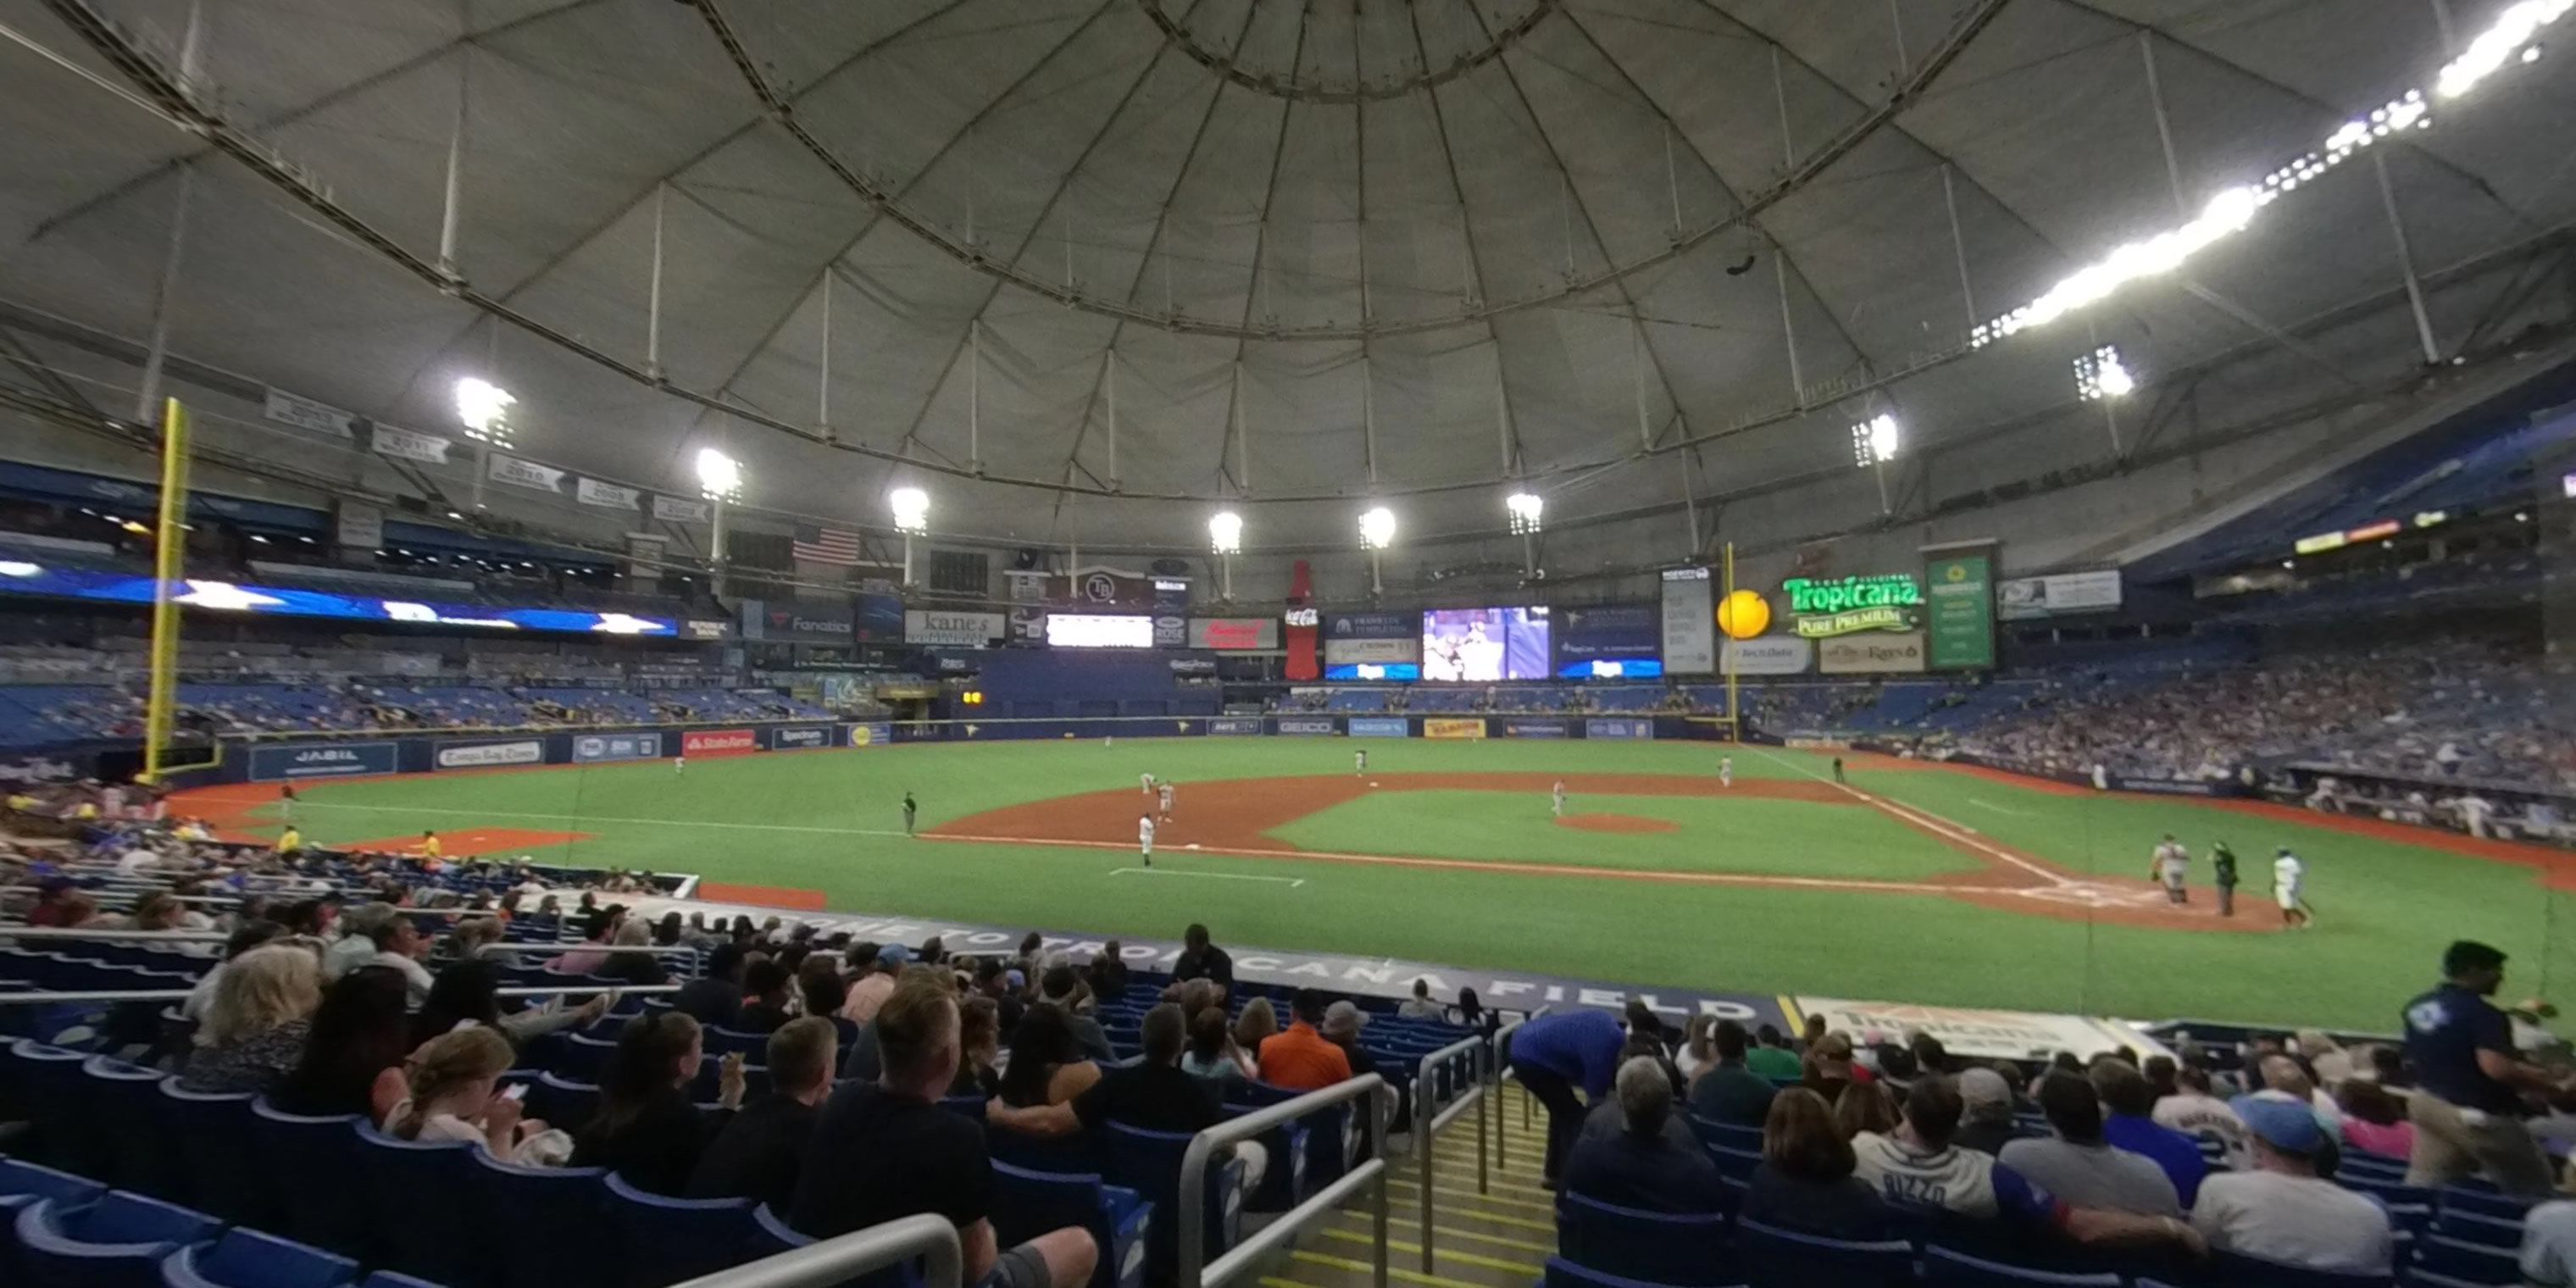 section 113 panoramic seat view  for baseball - tropicana field